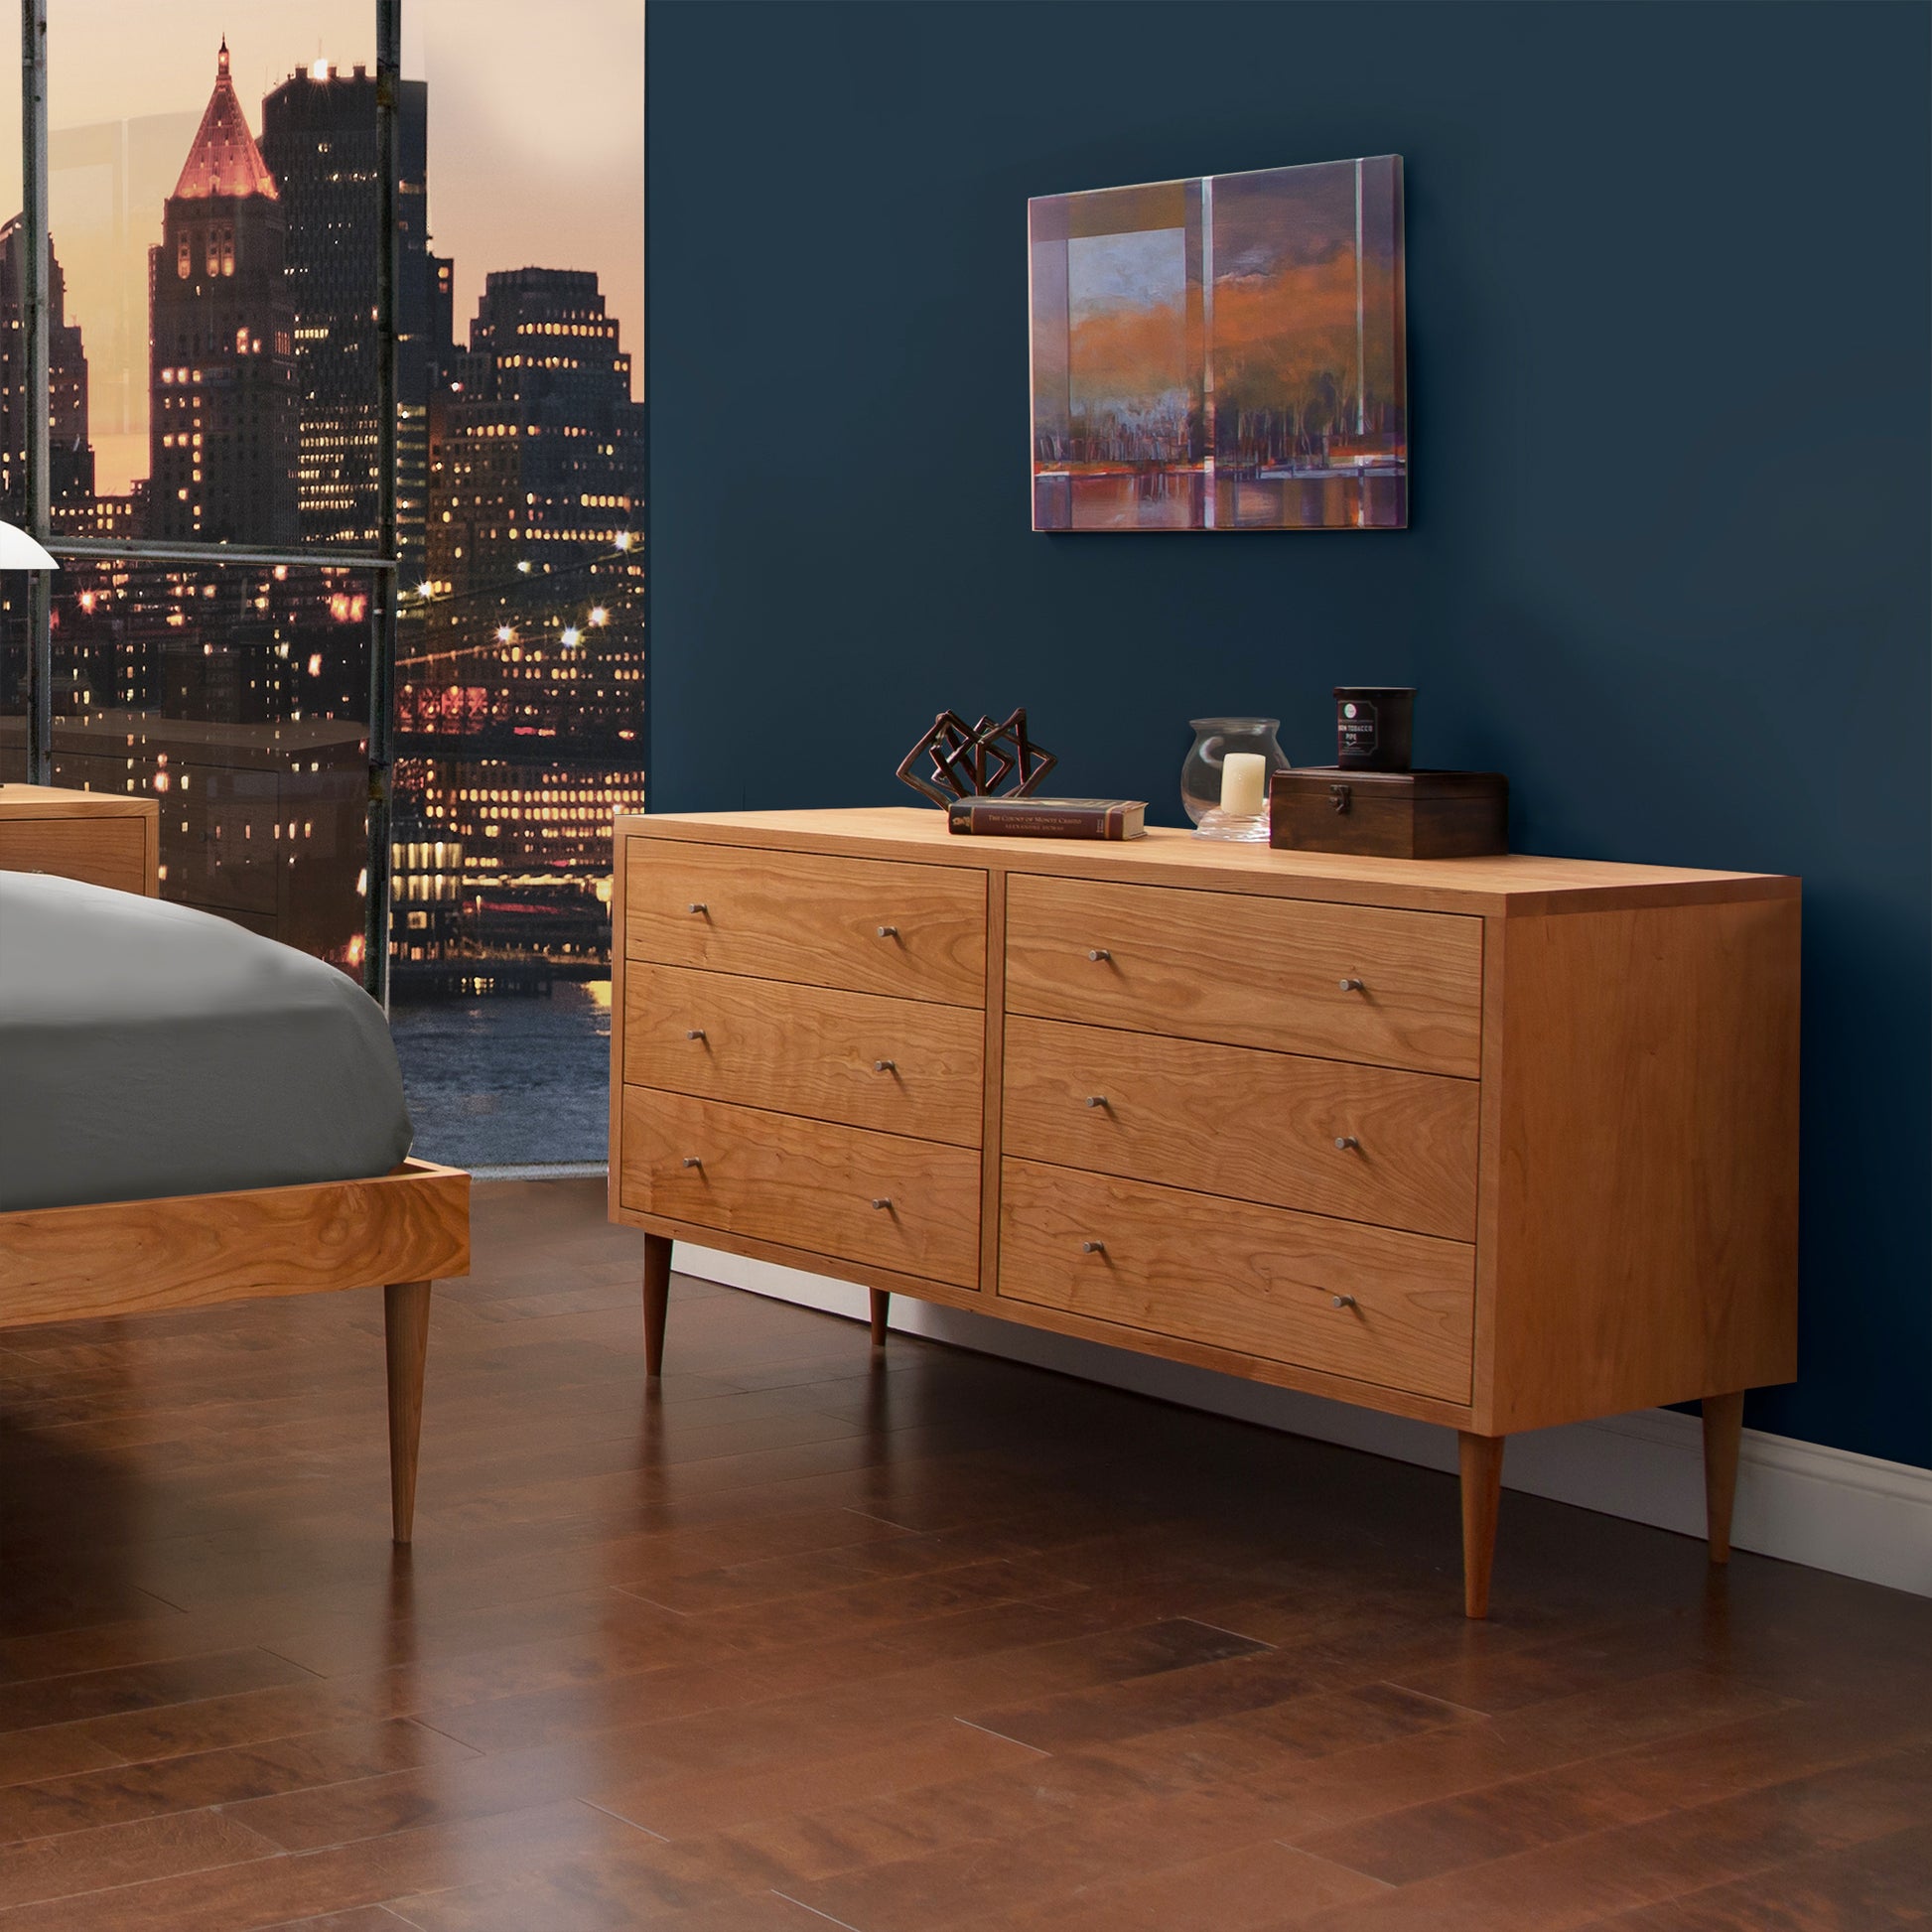 A modern bedroom featuring a Vermont Furniture Designs Larssen 6-Drawer Dresser of solid wood construction and mid-century modern design with six drawers, next to which is a smaller bedside table with a lamp and a cup, against a